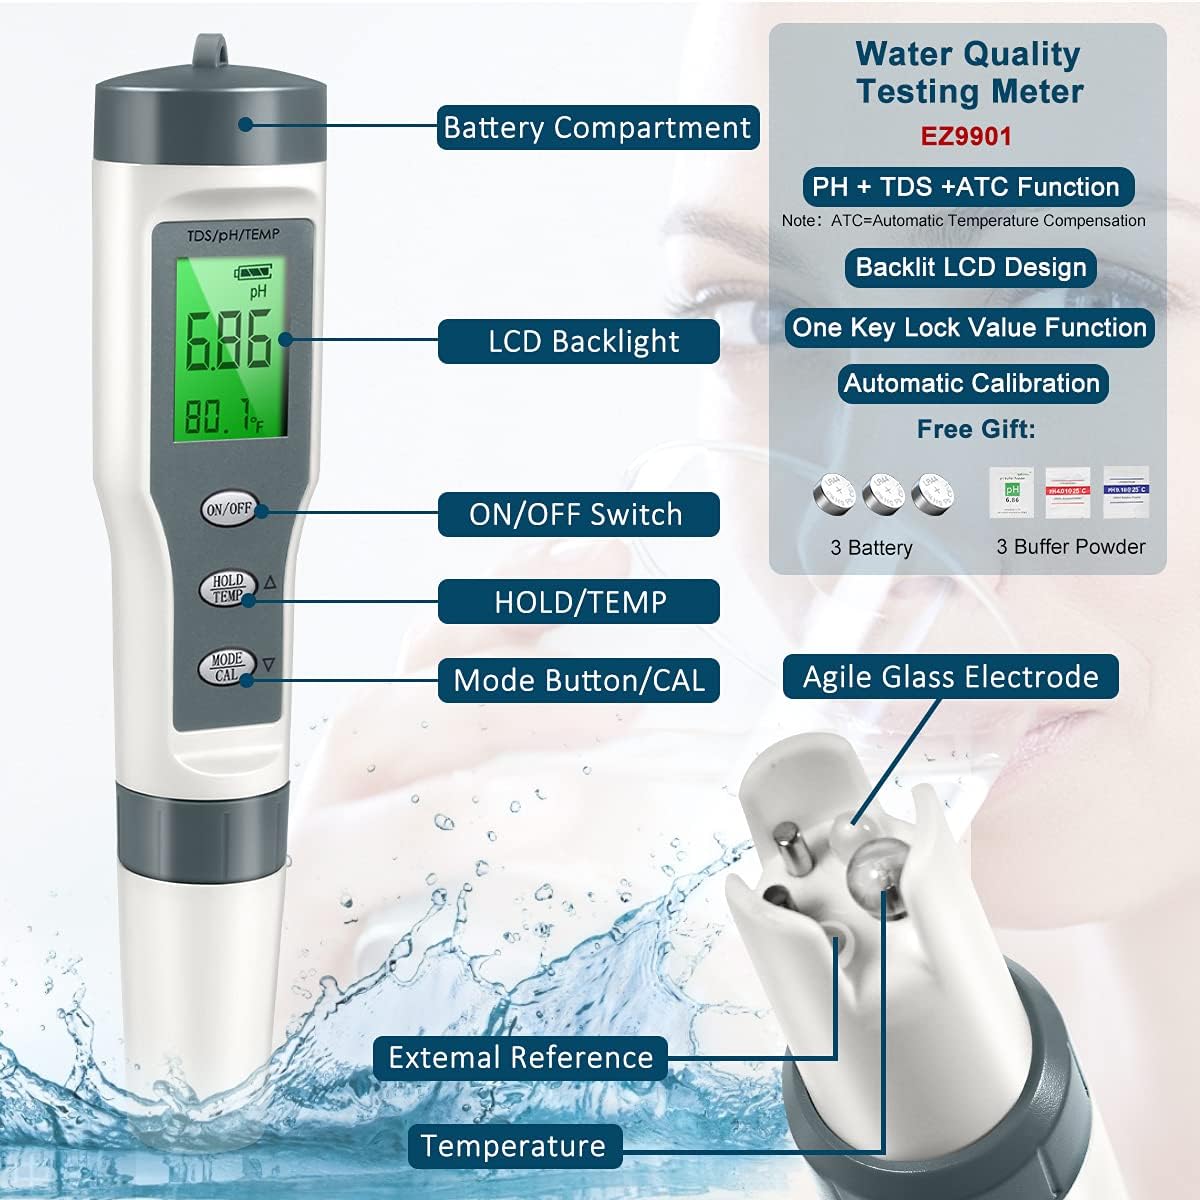 Digital PH Meter Pool and Aquarium Water PH Tester Design with ATC 2019-Yellow PH Meter 0.01 PH High Accuracy Water Quality Tester with 0-14 PH Measurement Range for Household Drinking